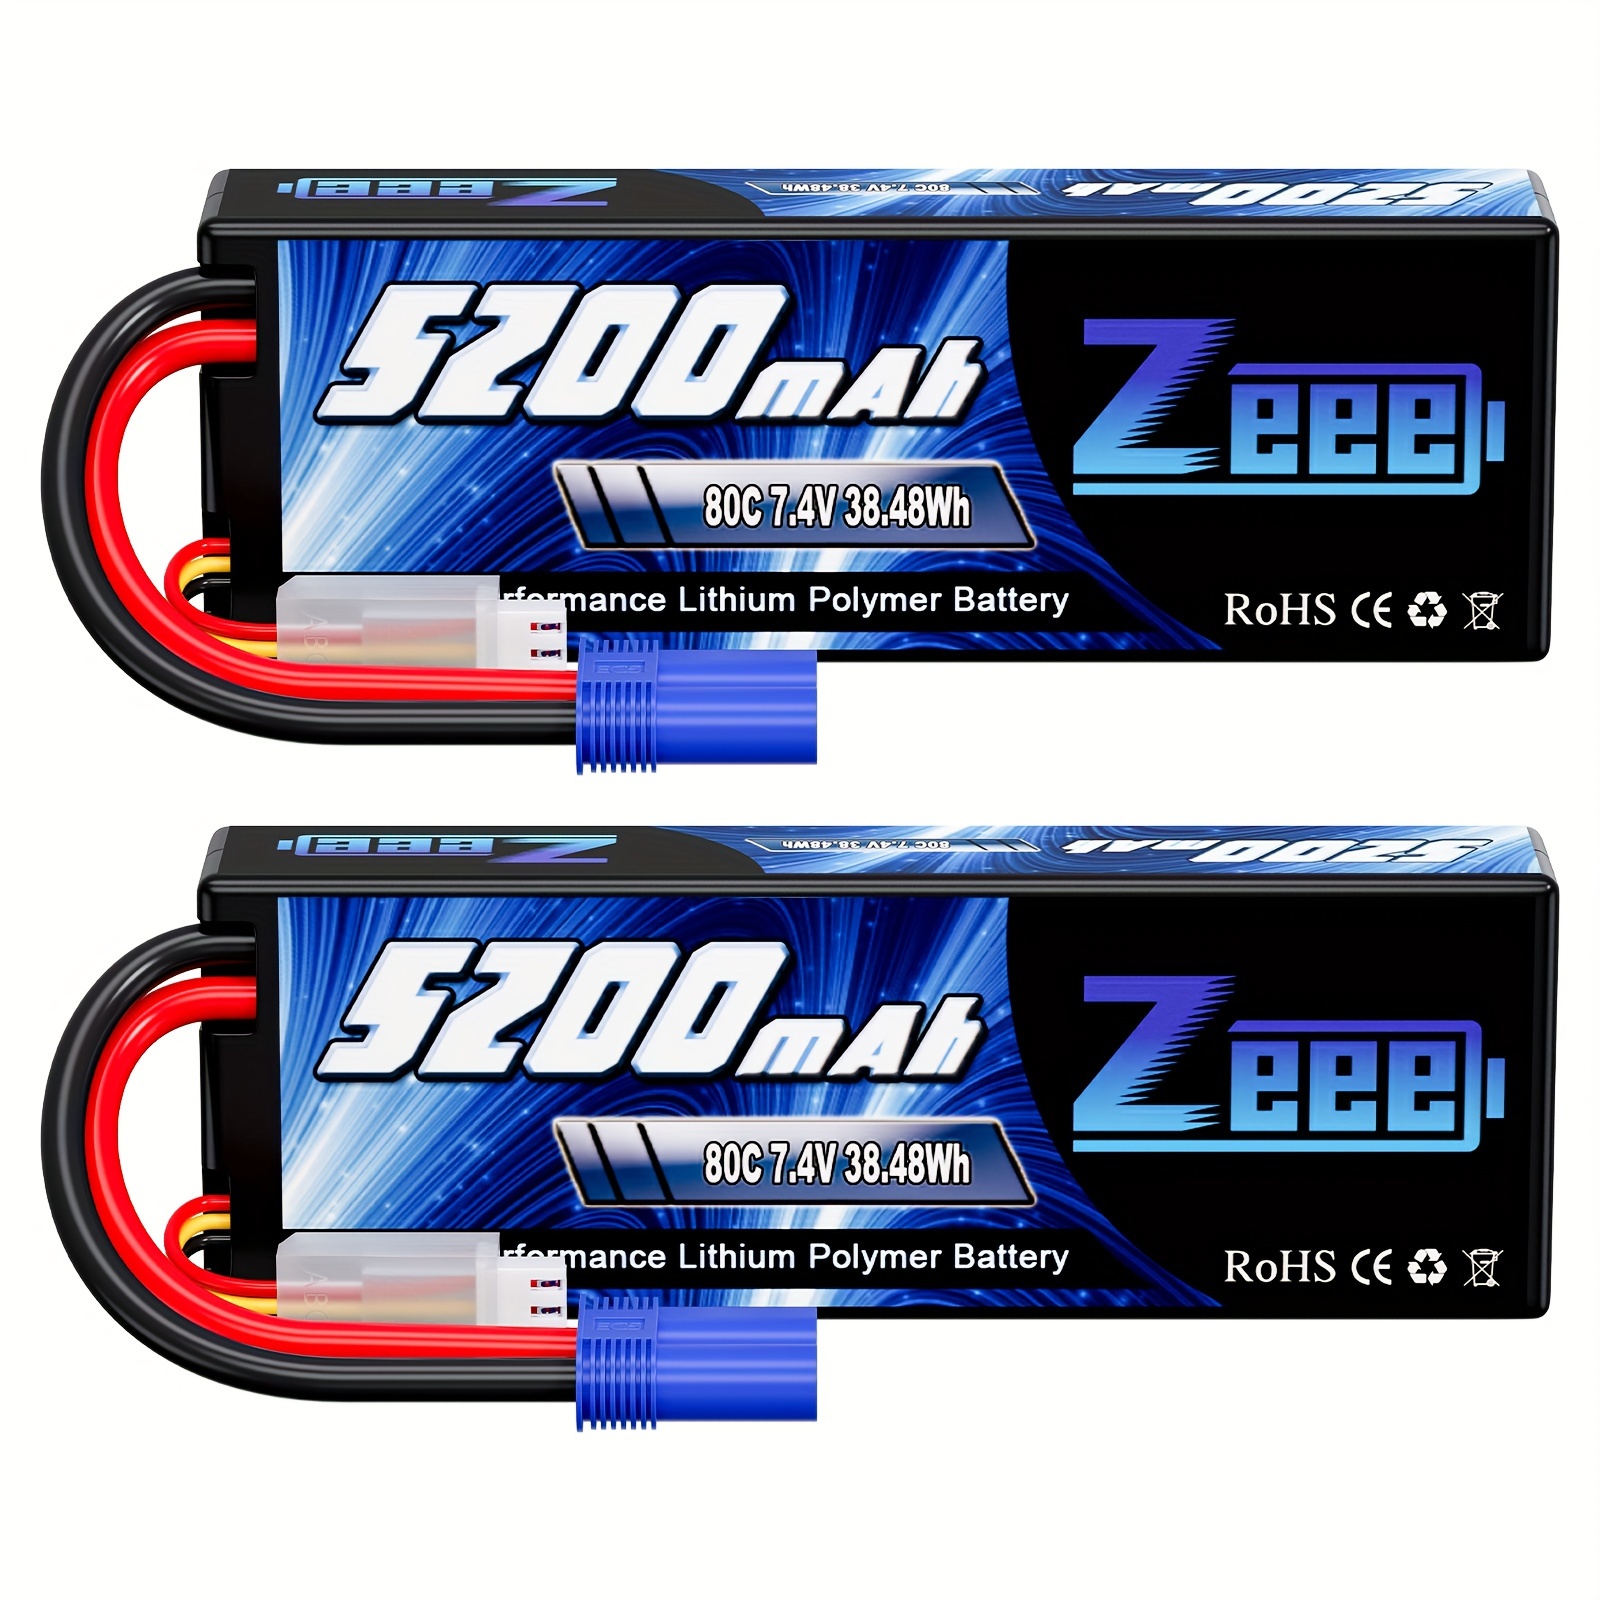 

Zeee 2s Lipo Battery 7.4v 5200mah 80c Hard Case Battery With Ec5 Plug Compatible With 1/8 1/10 Rc Vehicles Car Slash Rc Buggy Truggy Rc Airplane Drone (2 Pack)